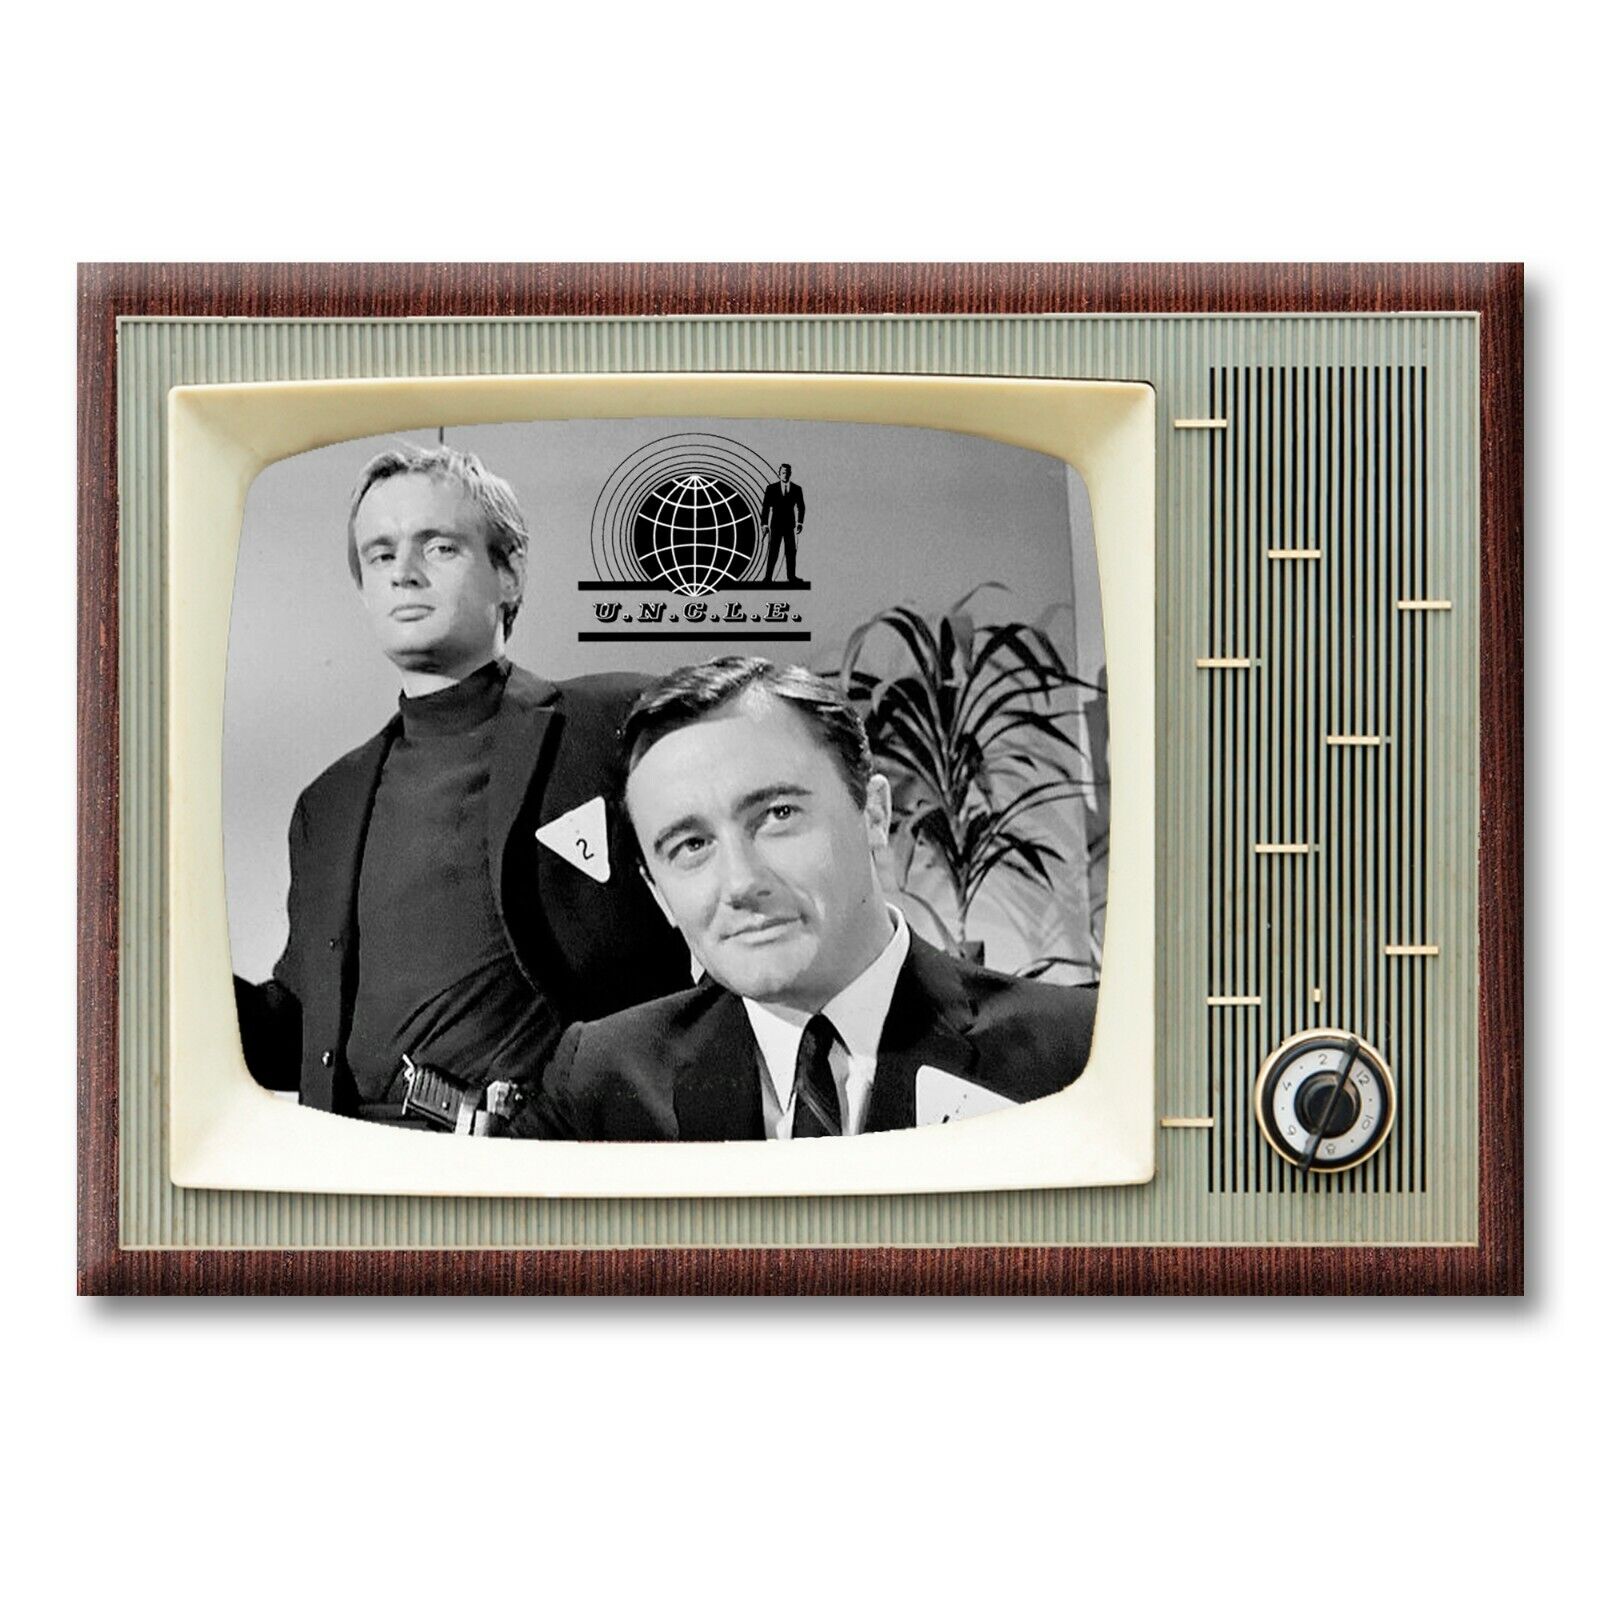 MAN FROM UNCLE TV Show Retro TV 3.5 inches x 2.5 inches FRIDGE MAGNET U.N.C.L.E.